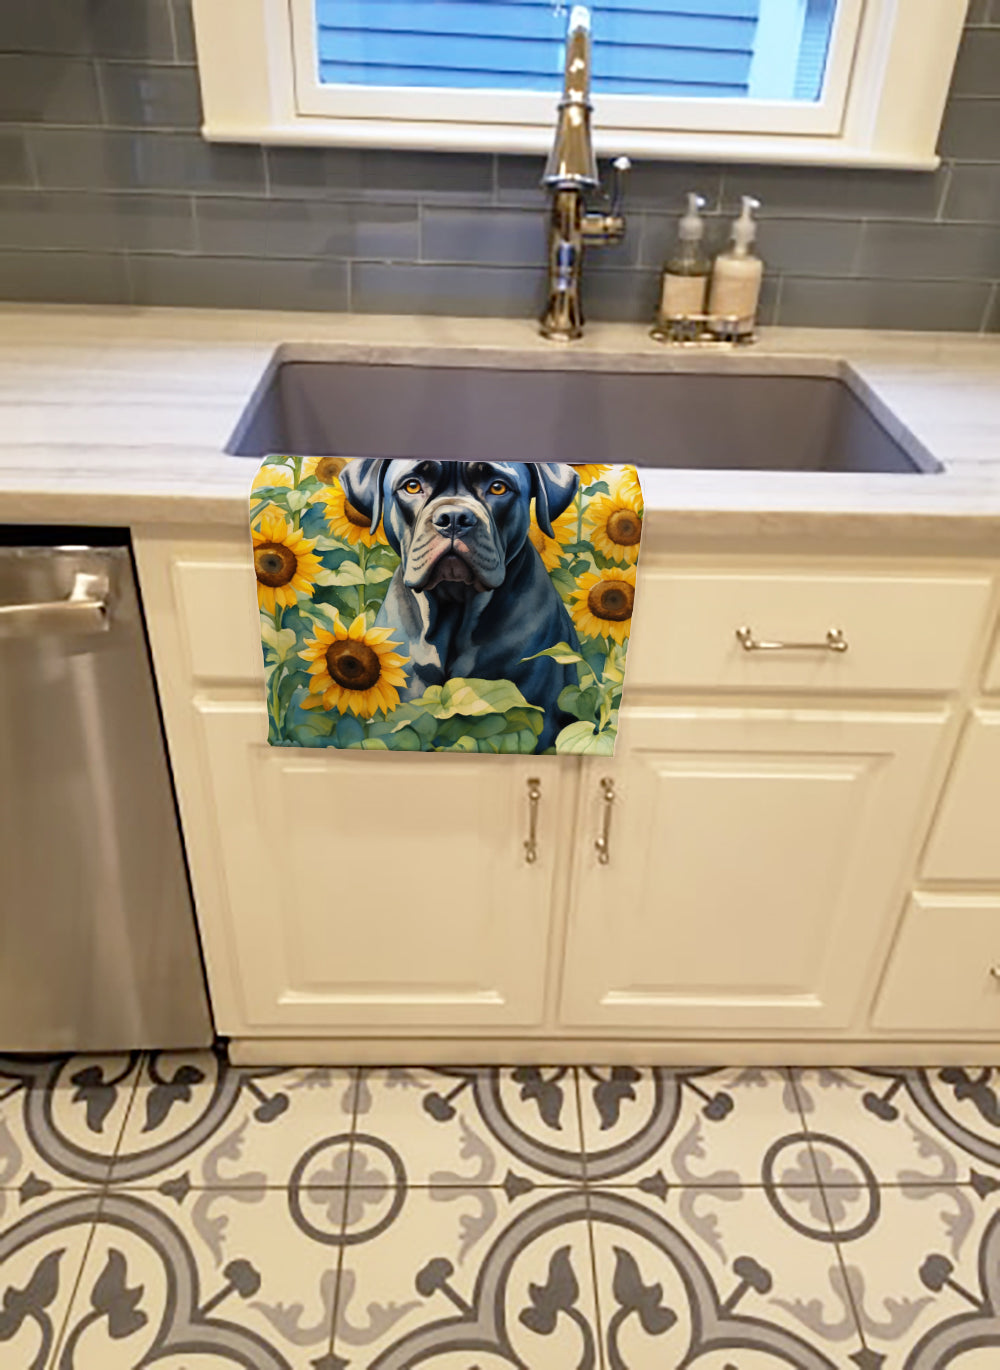 Buy this Cane Corso in Sunflowers Kitchen Towel